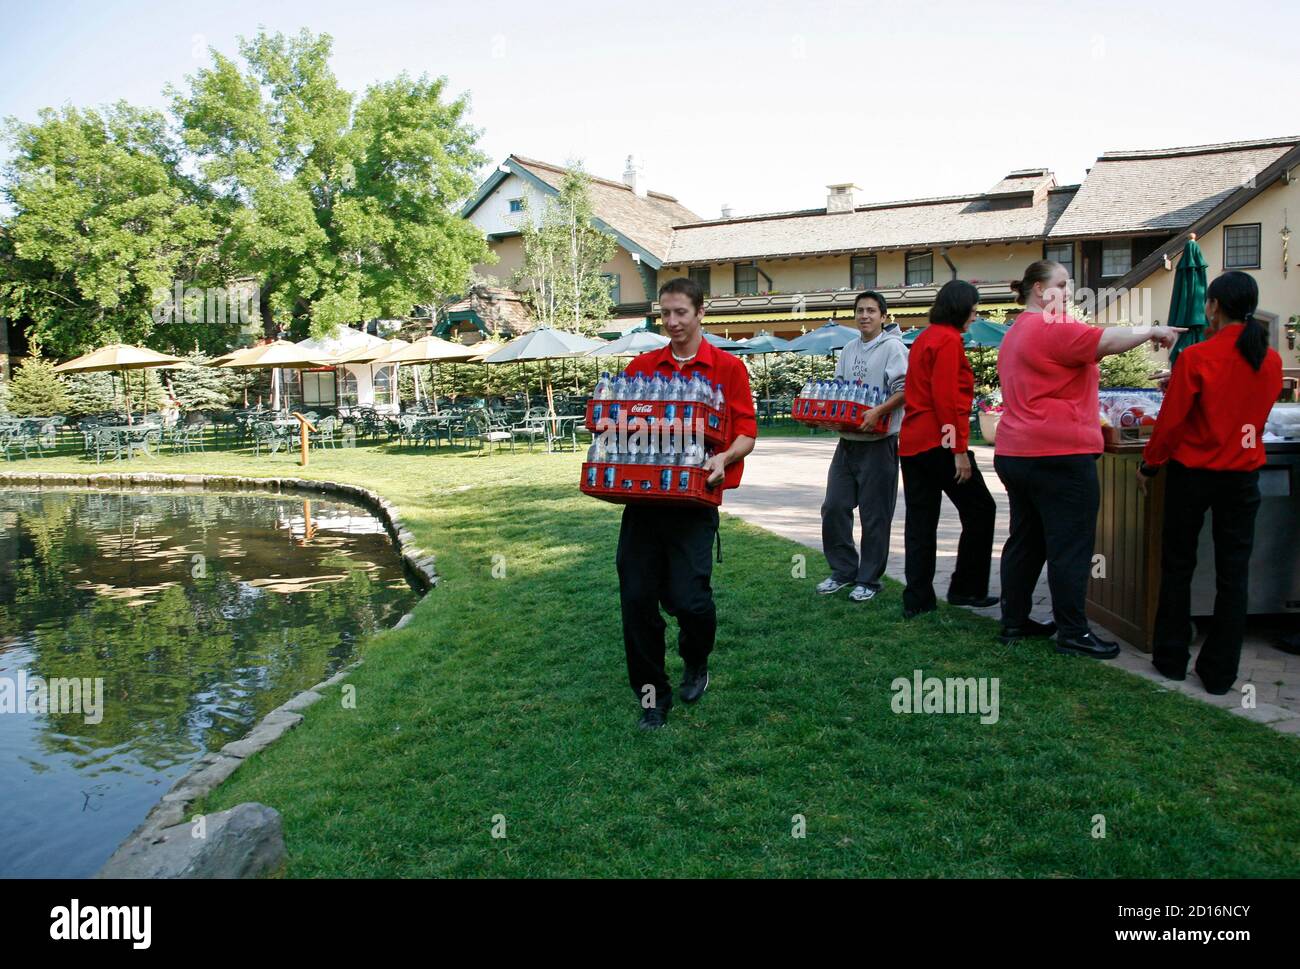 A worker carries water past the duck pond where attendees at the 26th annual Allen & Co conference will lunch in Sun Valley, Idaho July 8, 2008. The deteriorating U.S. economy and slumping stock prices will frame discussions among top media and technology executives at the conference.  REUTERS/Rick Wilking (UNITED STATES) Stock Photo